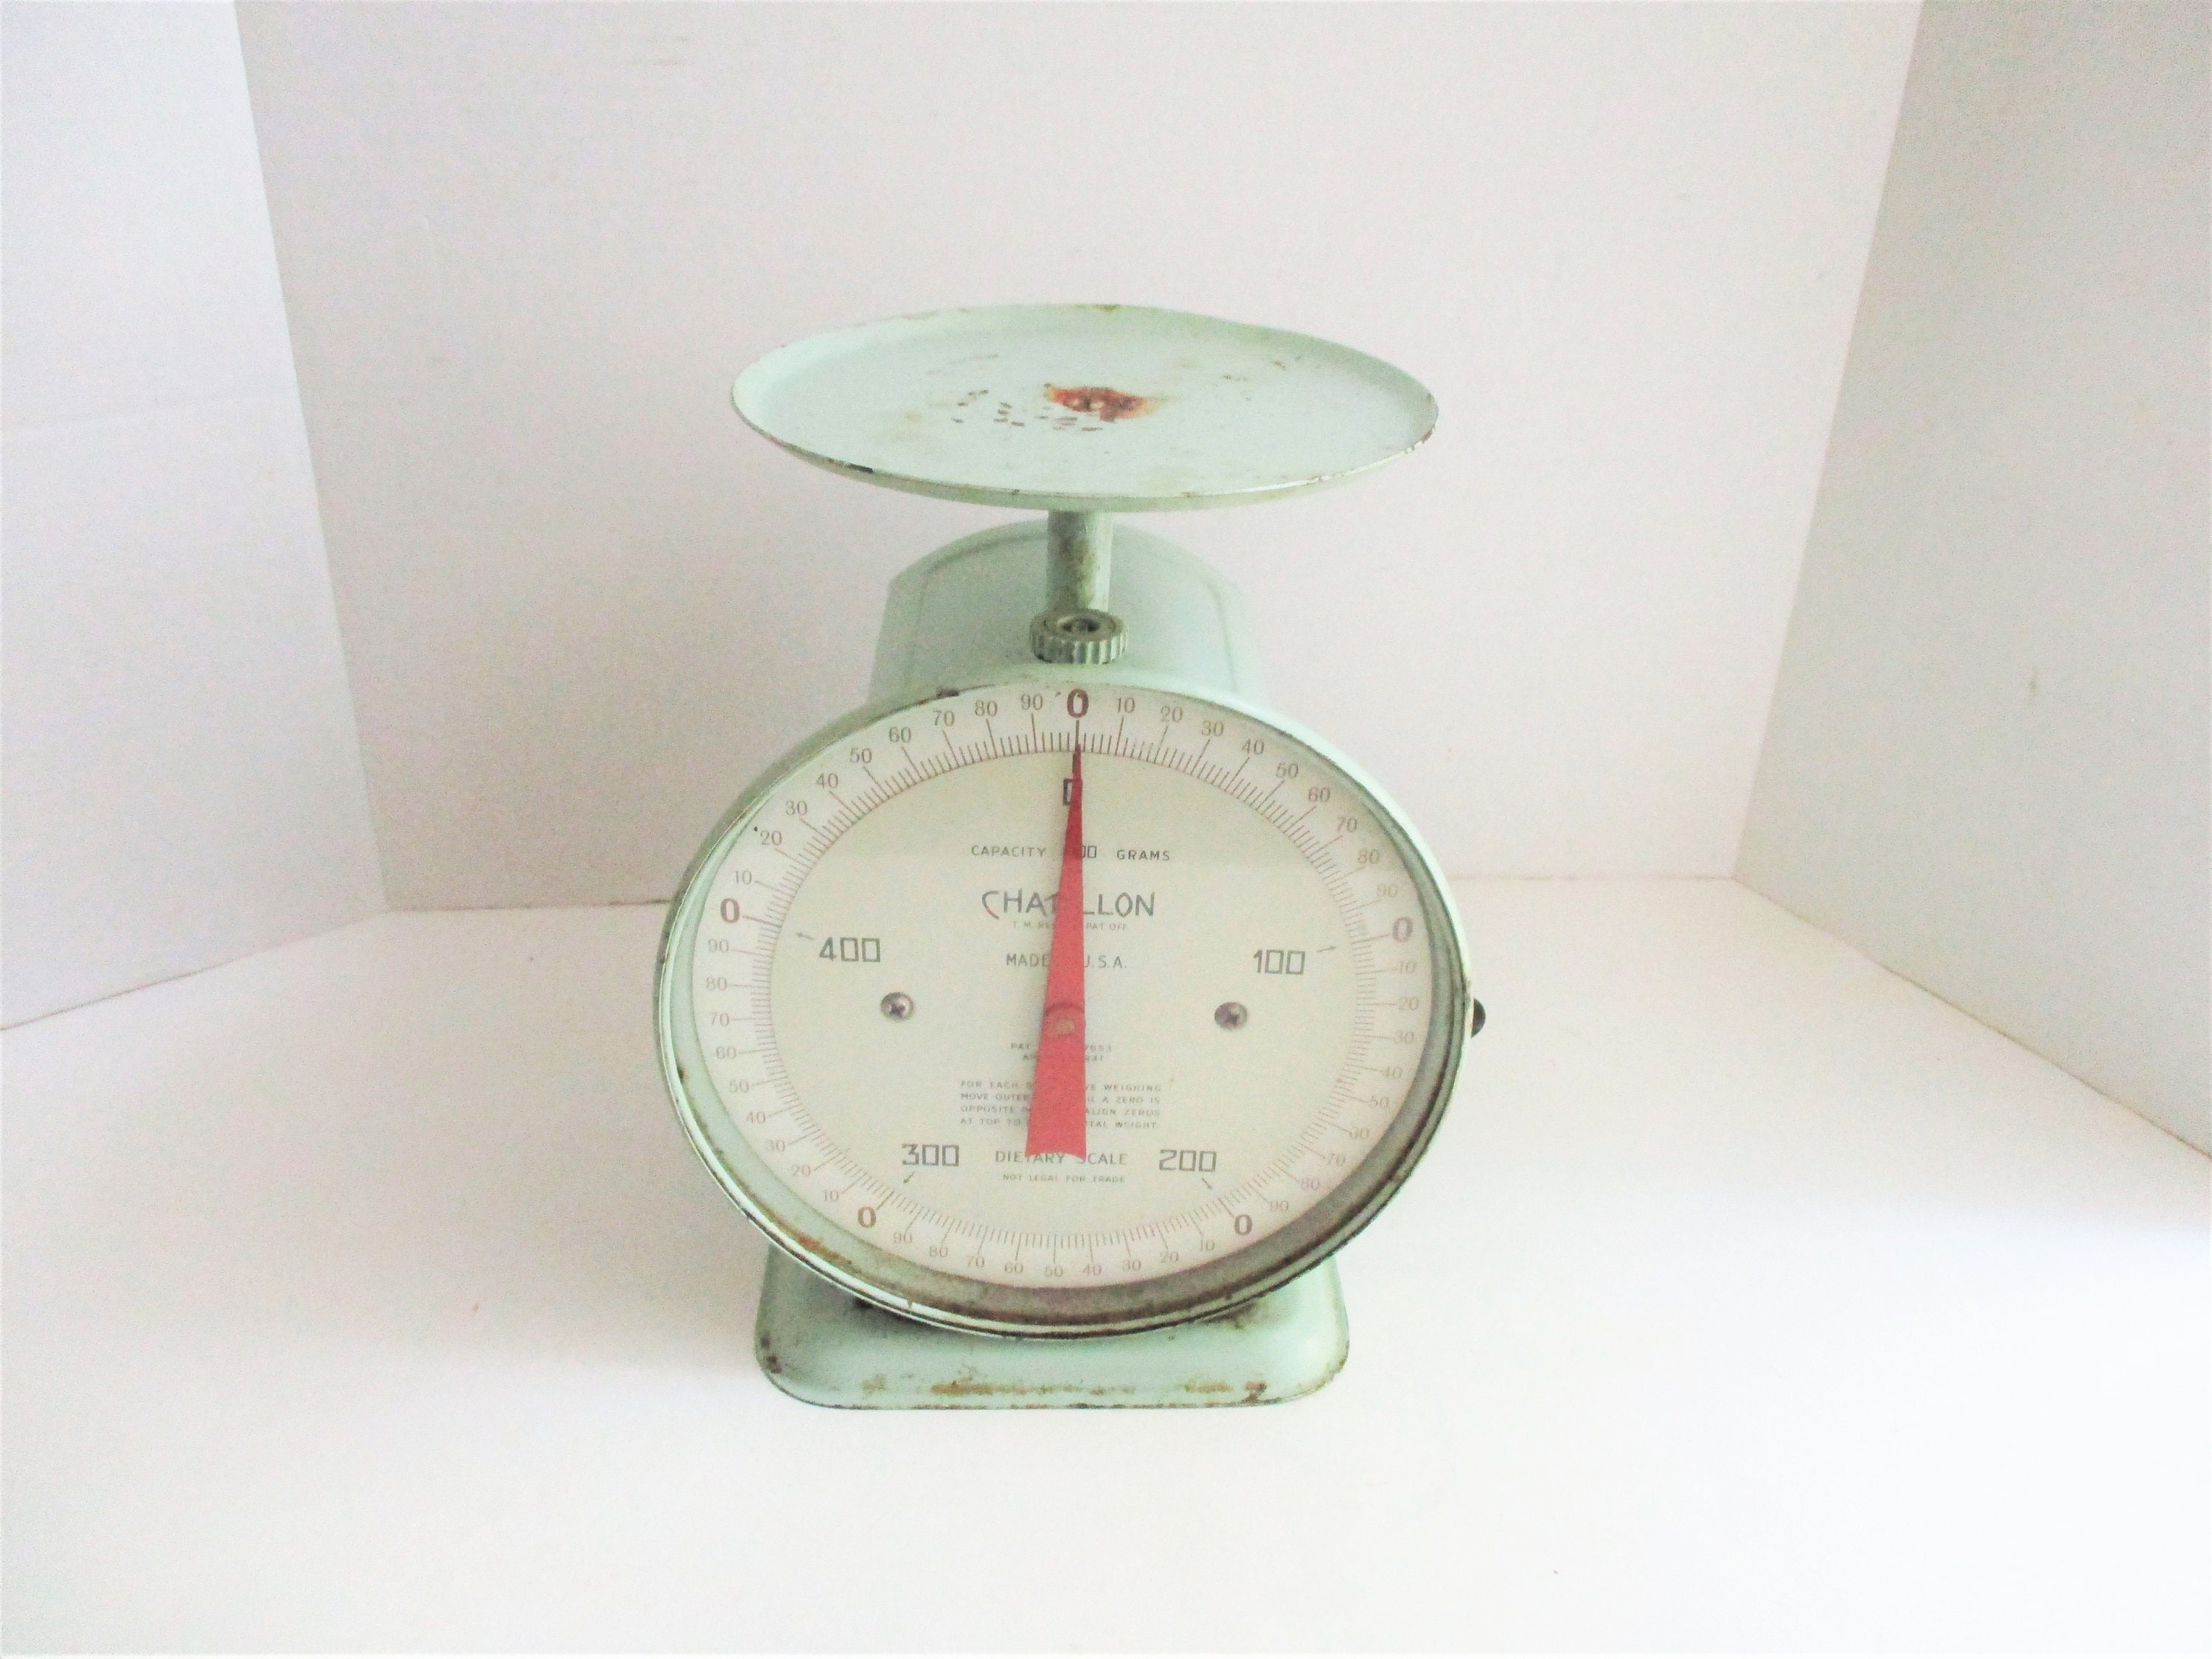 Vintage Borg Dietetic Scale Grams and Ounces 4 x 4 x 2 inches